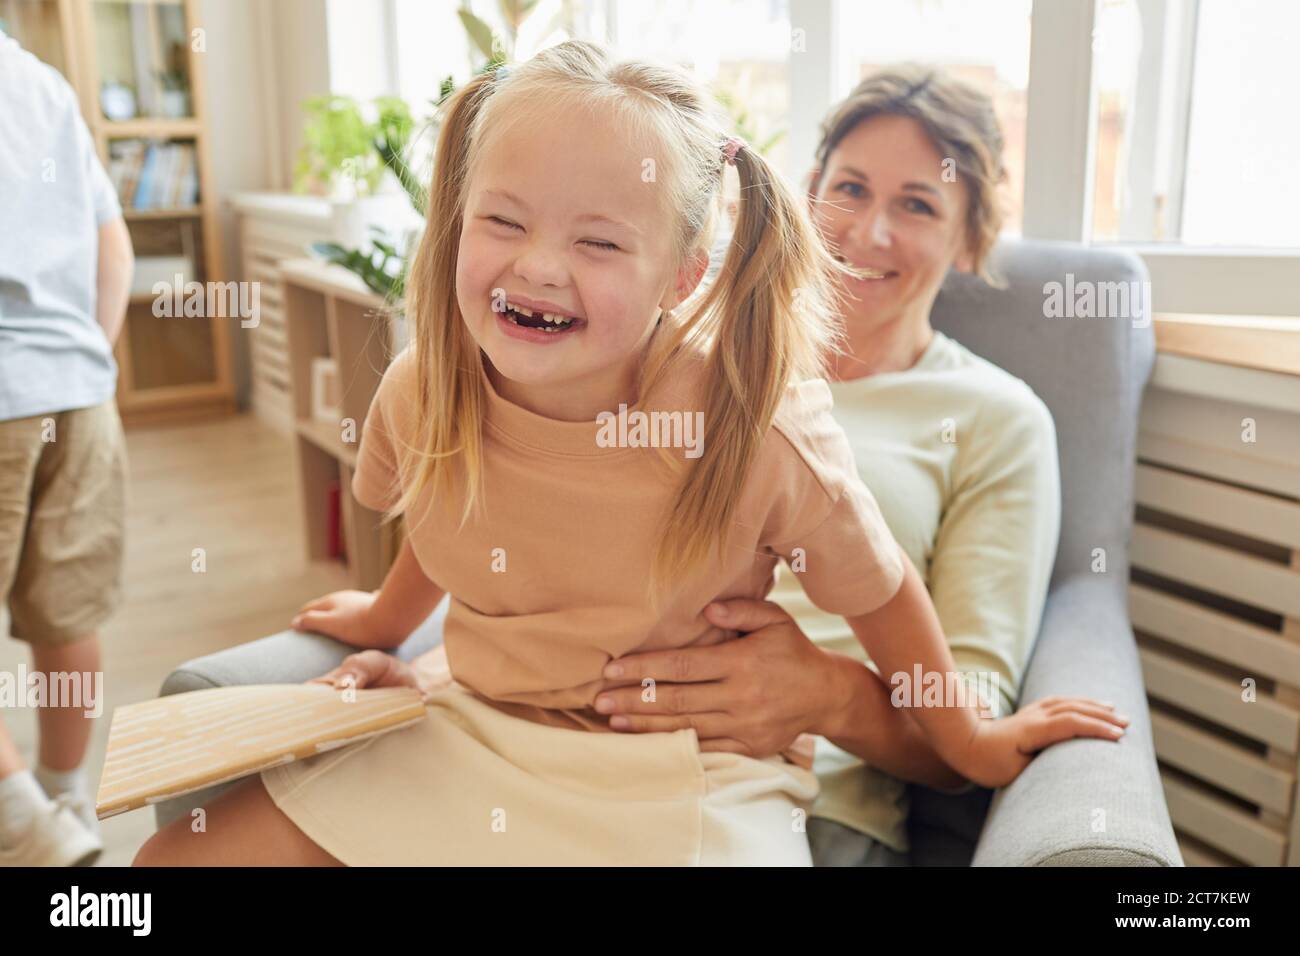 Portrait of cute girl with down syndrome laughing happily while playing with mother at home Stock Photo